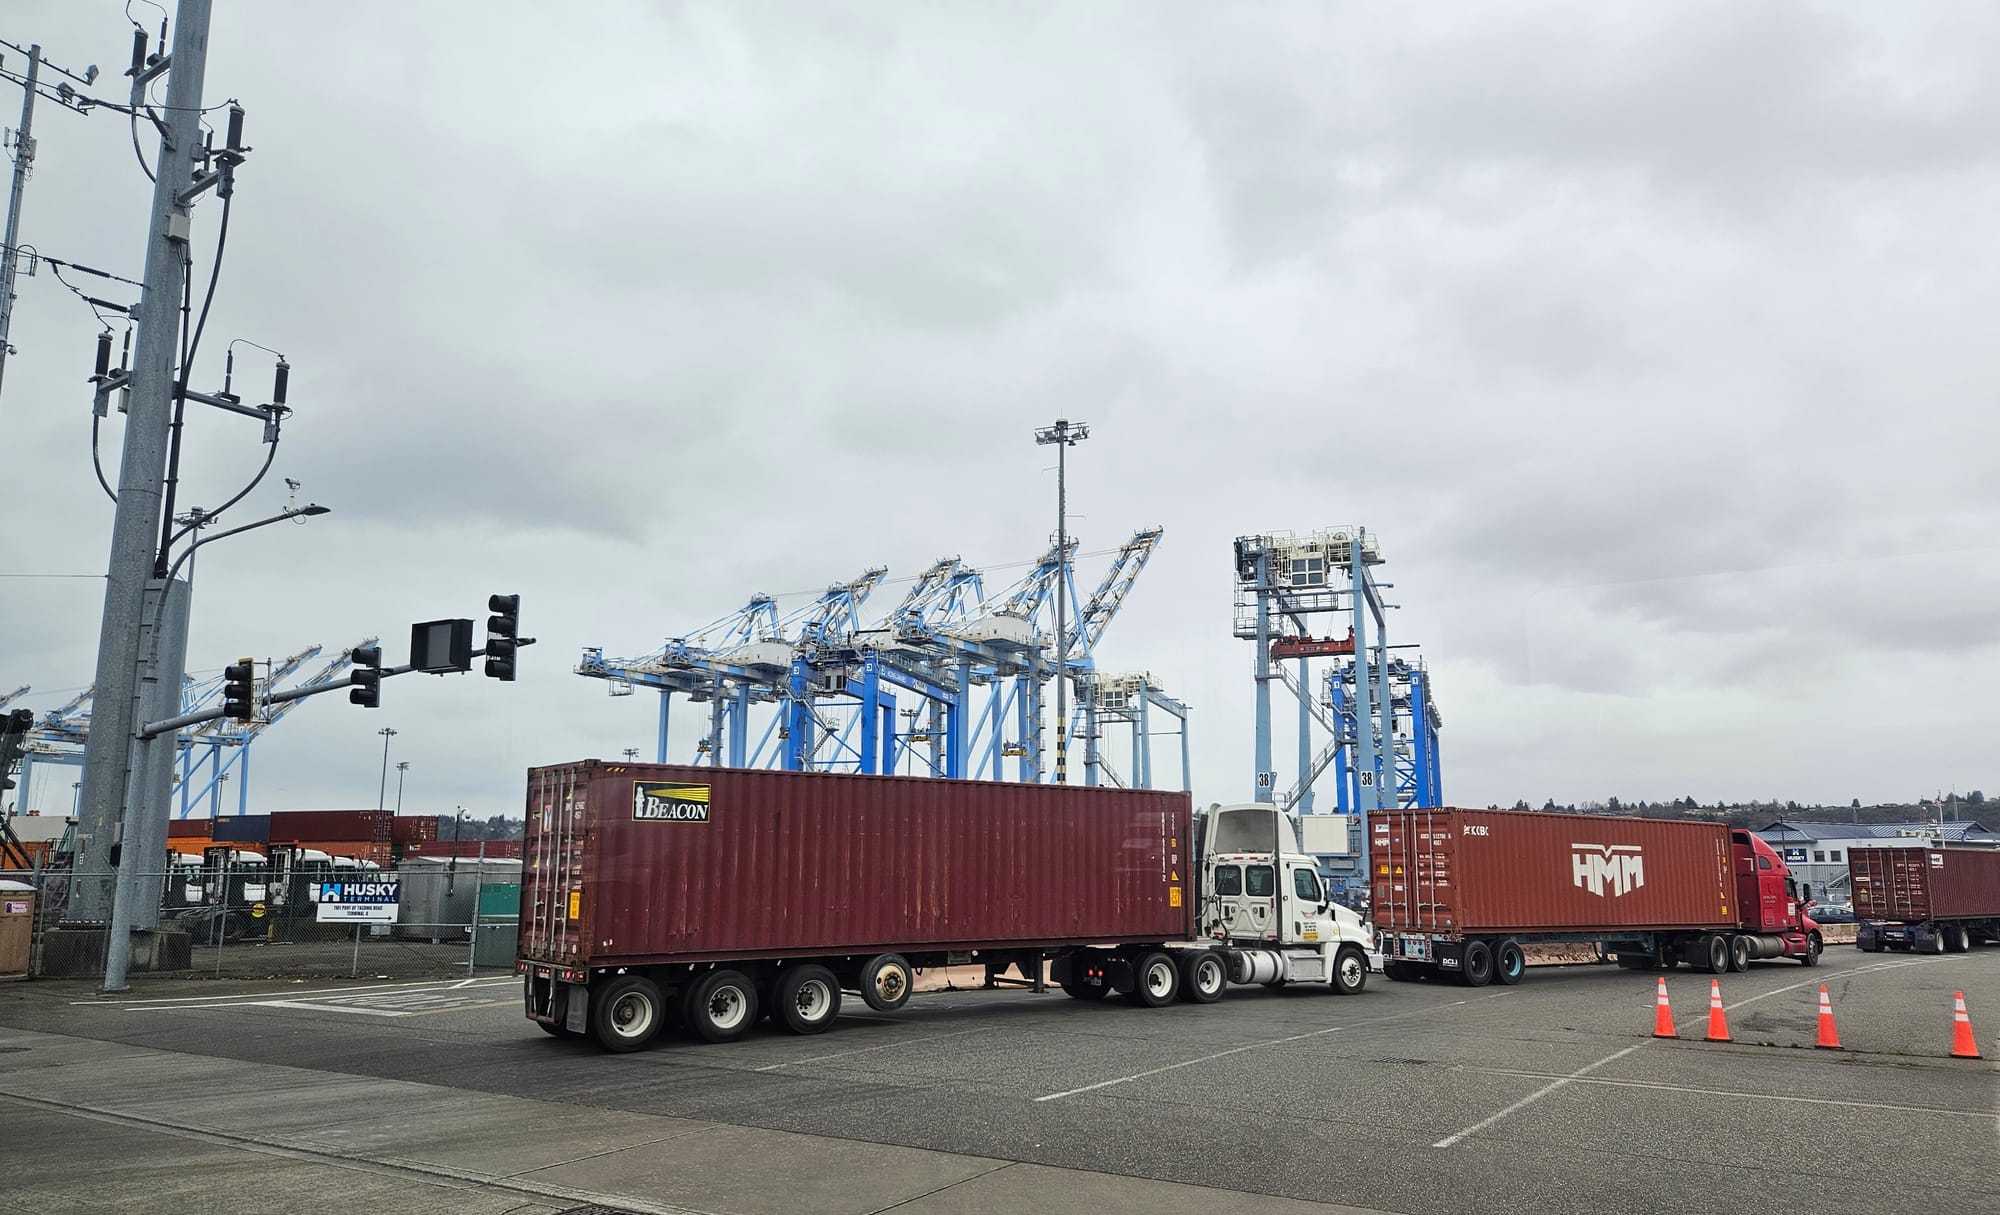 Three trucks loaded with shipping containers wait in a line near an intersection, large blue cranes are in the background.